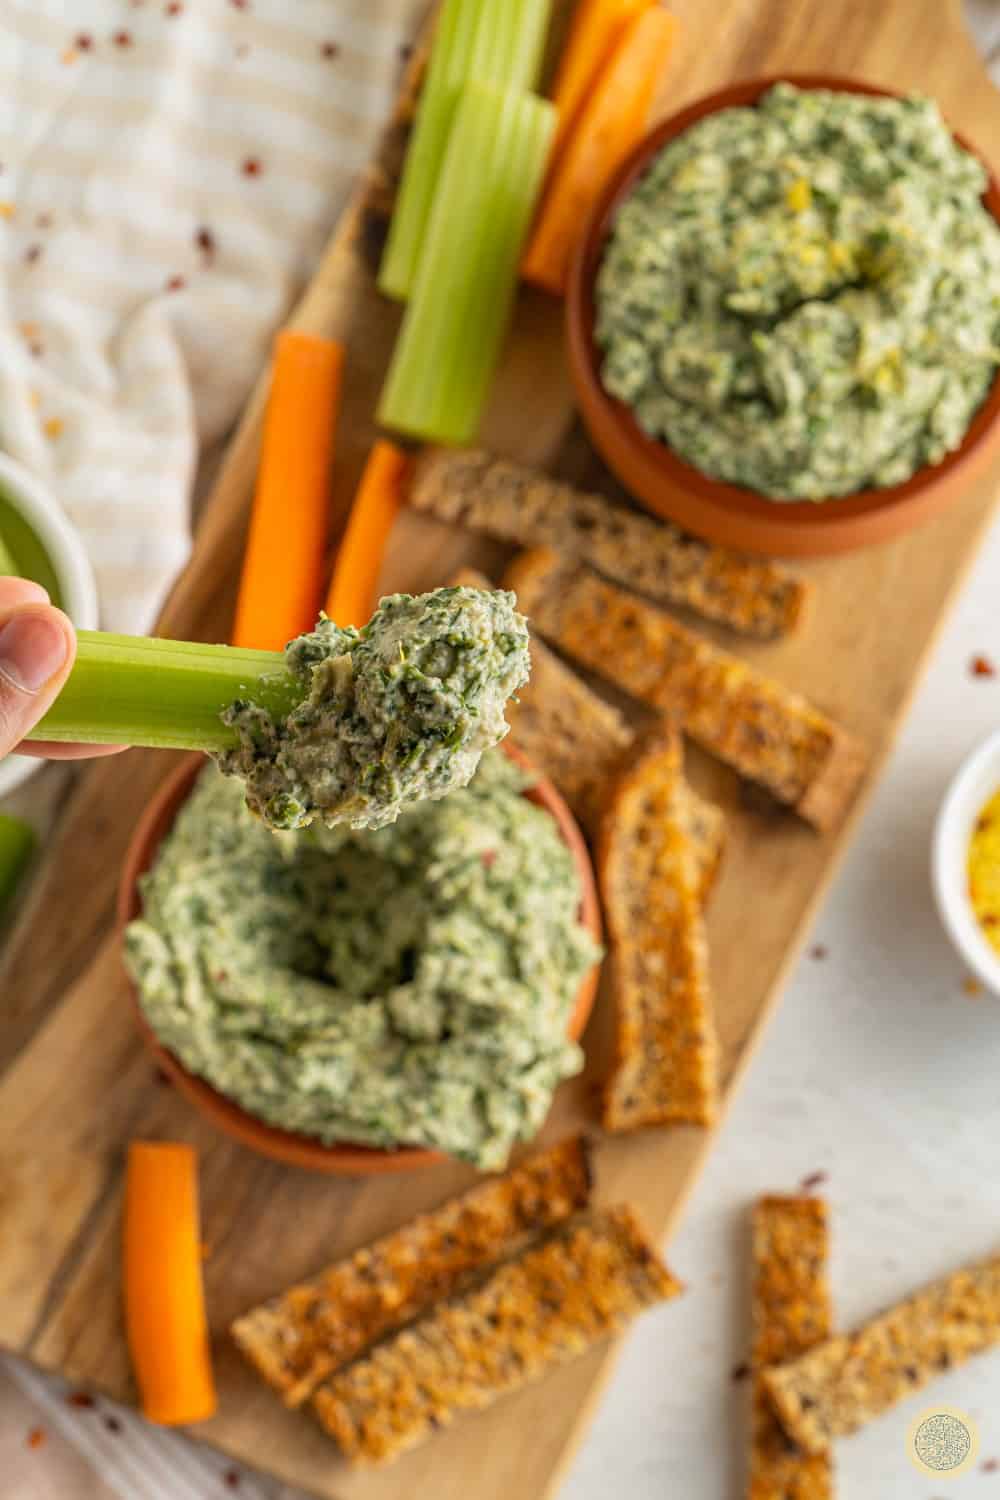 How long is vegan spinach dip good for?